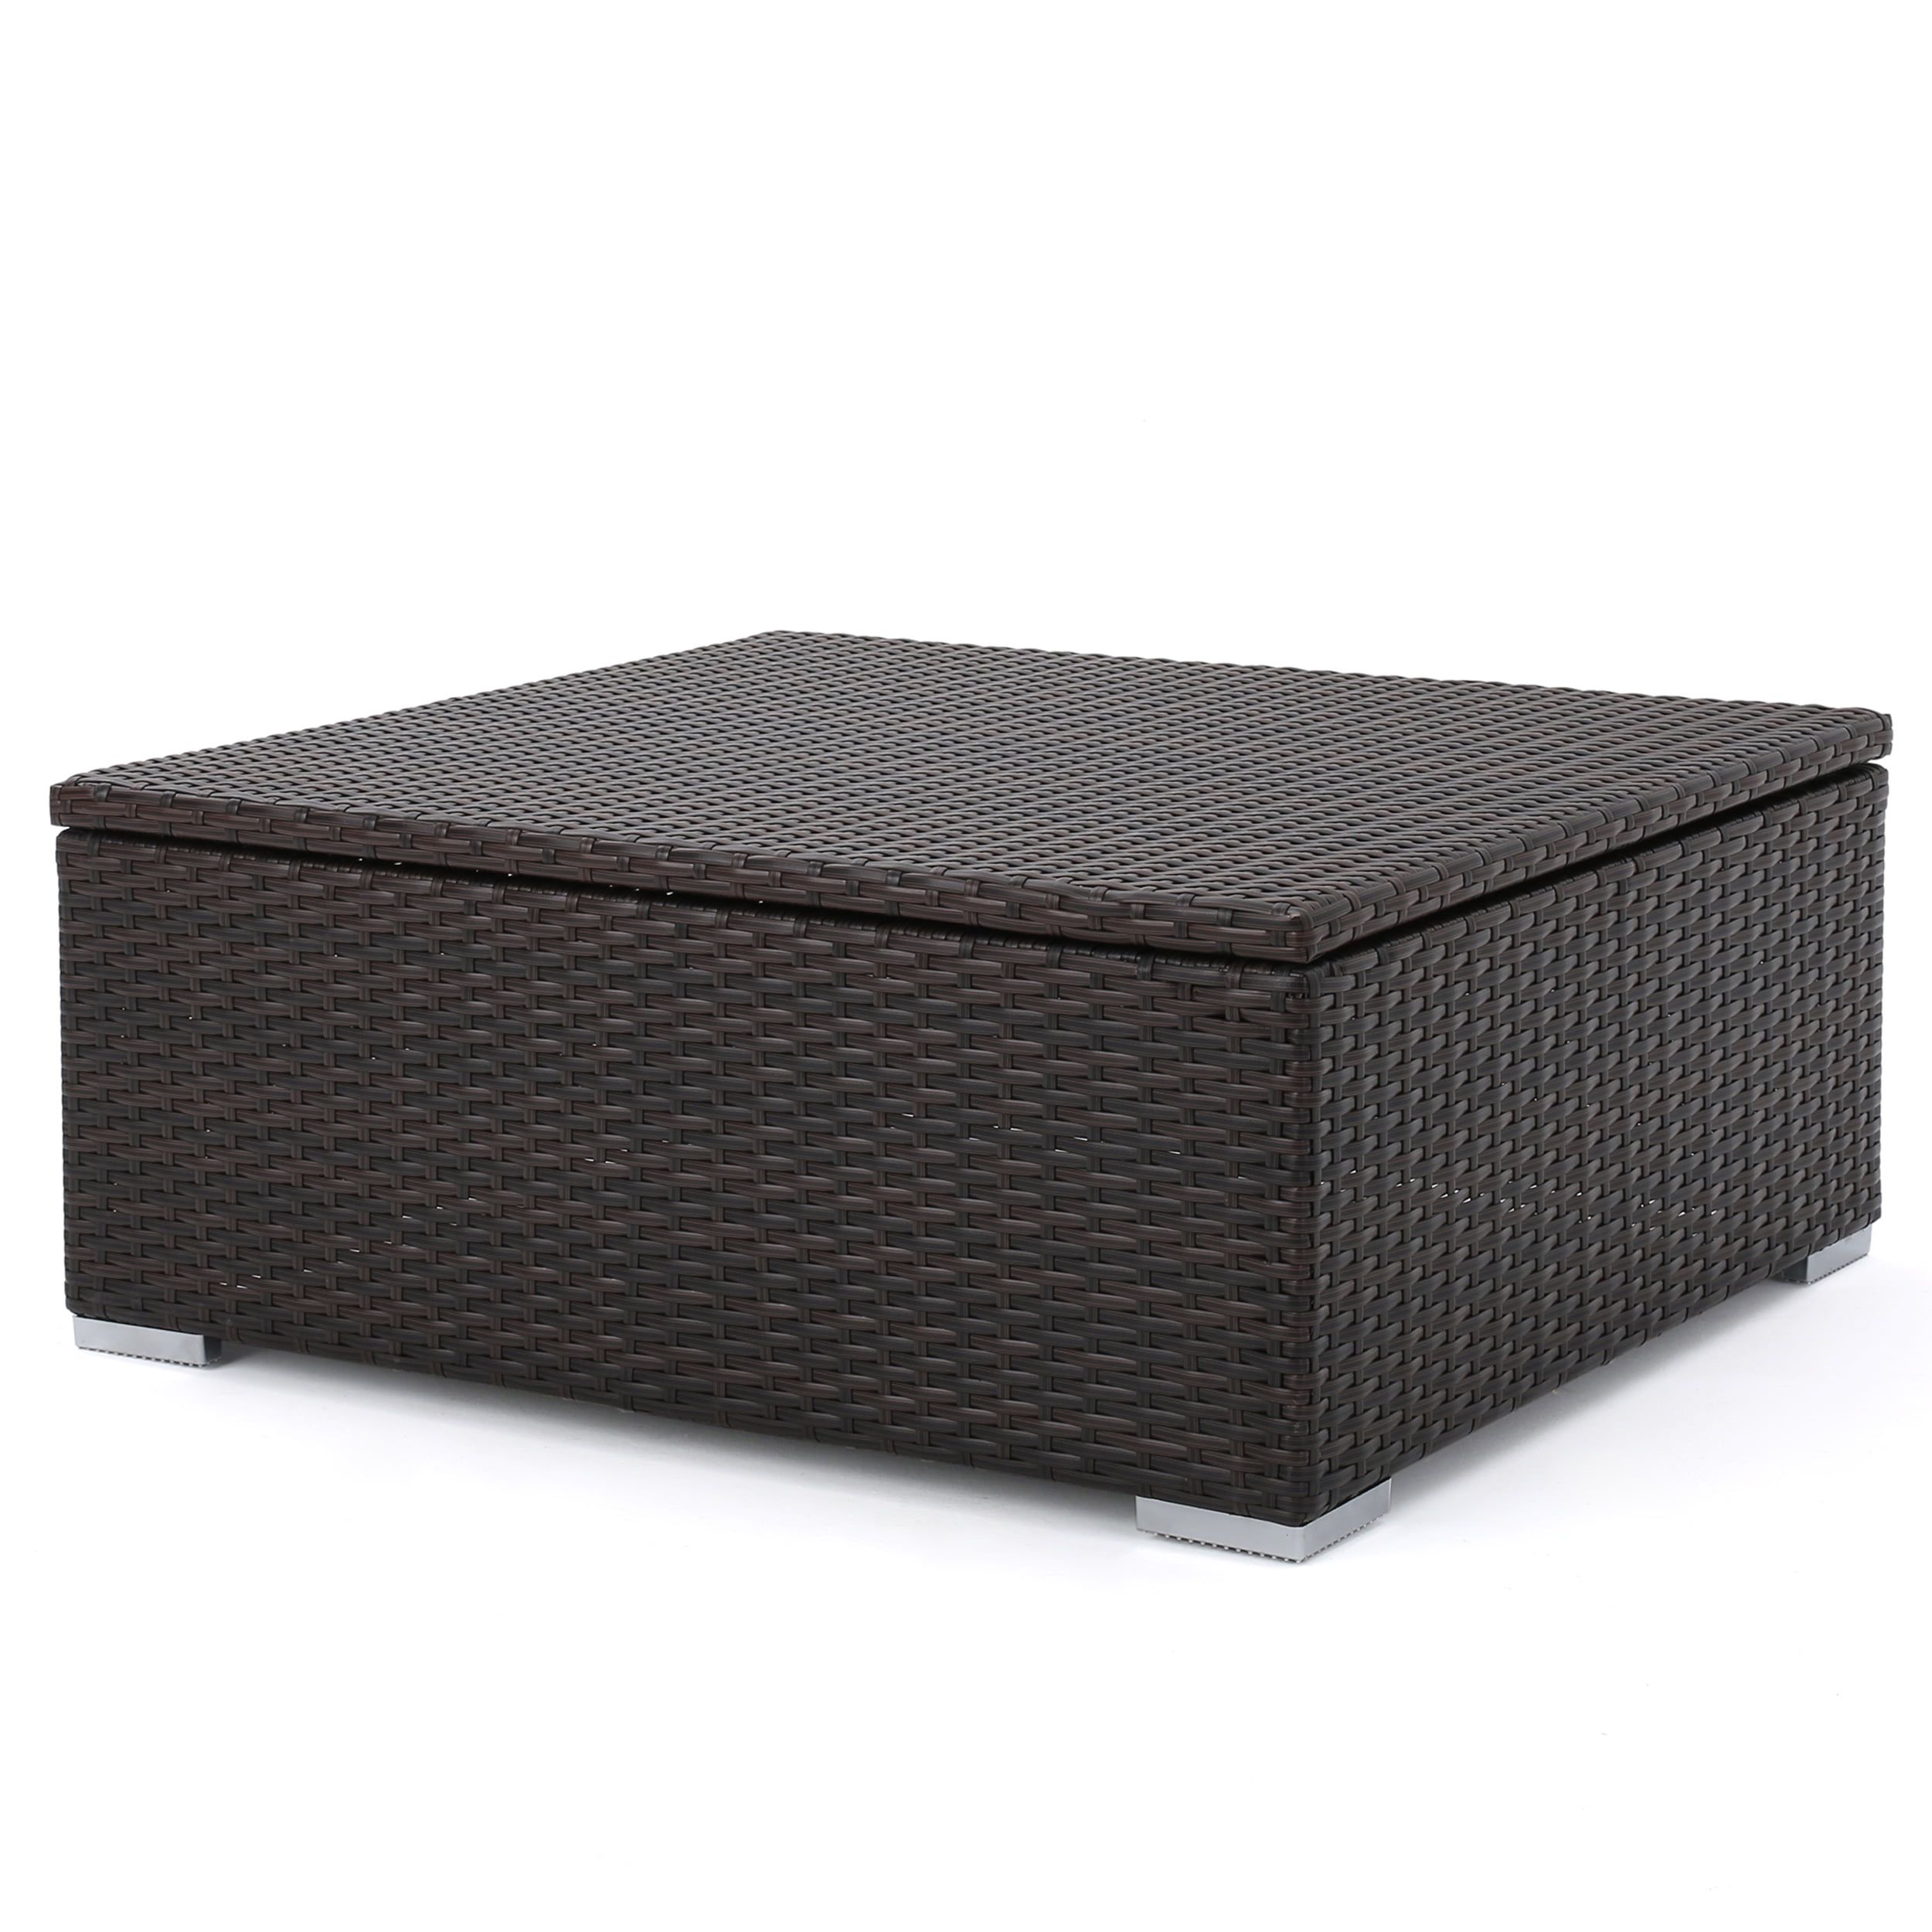 Costa Mesa Outdoor Wicker Coffee Table With Storage, Multibrown In Waterproof Coffee Tables (Gallery 4 of 21)